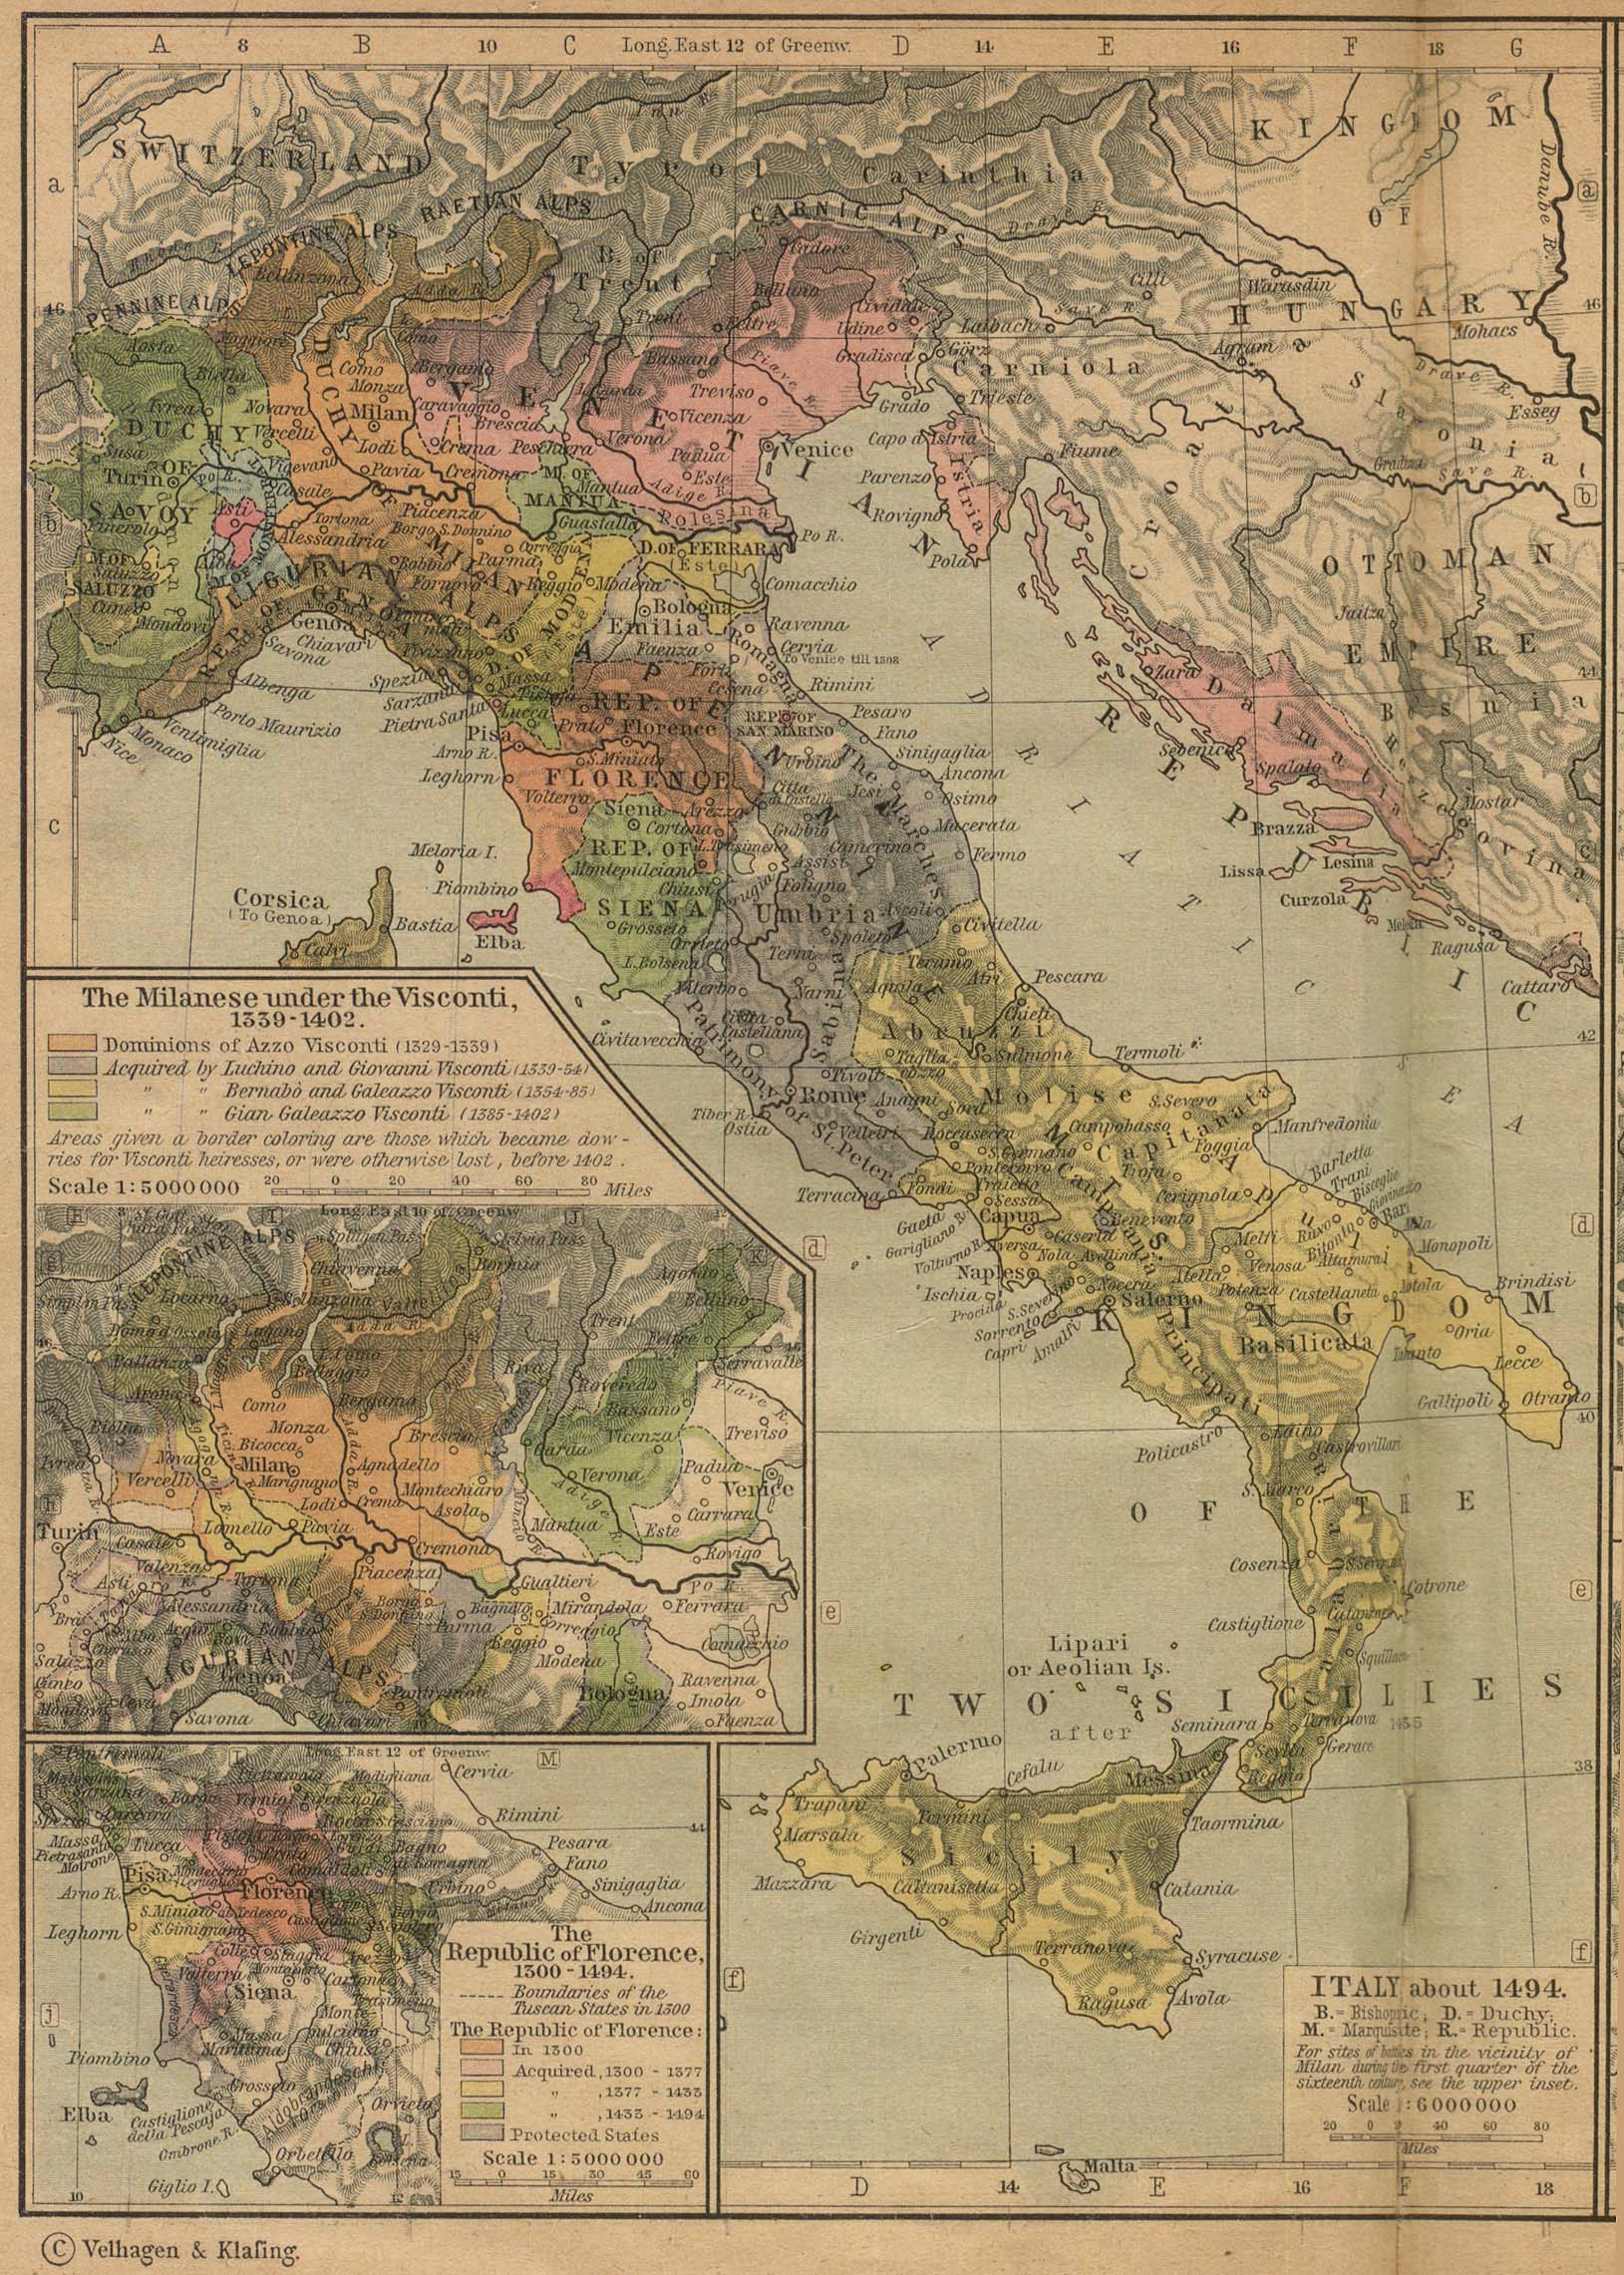 Historical Maps of Europe. Italy about 1494 (774K) Insets: The Milanese under the Visconti, 1339-1402. The Republic of Florence, 1300-1494. From The Historical Atlas by William R. Shepherd, 1923. 